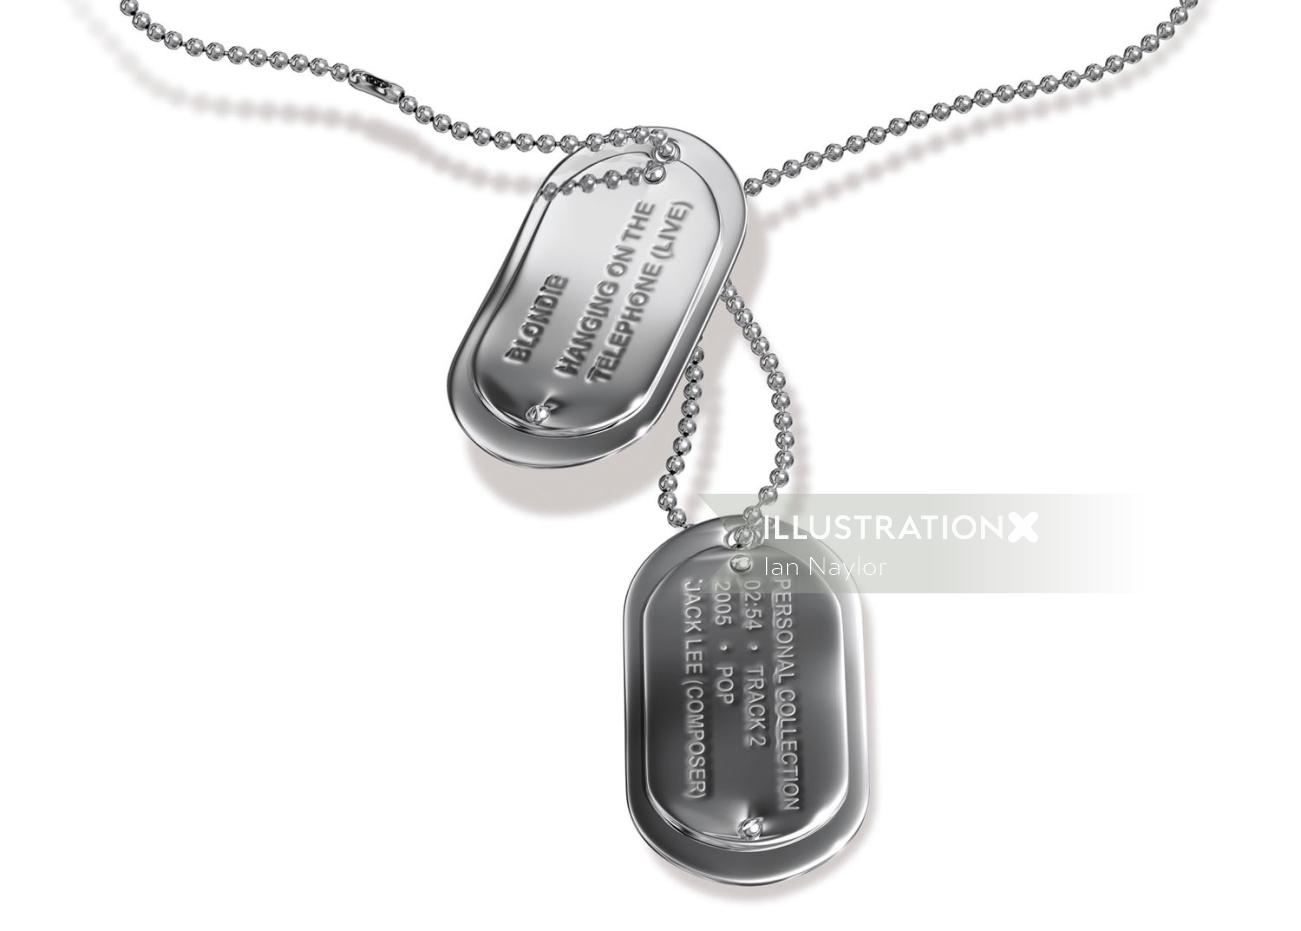 Dogtags illustration by Ian Naylor